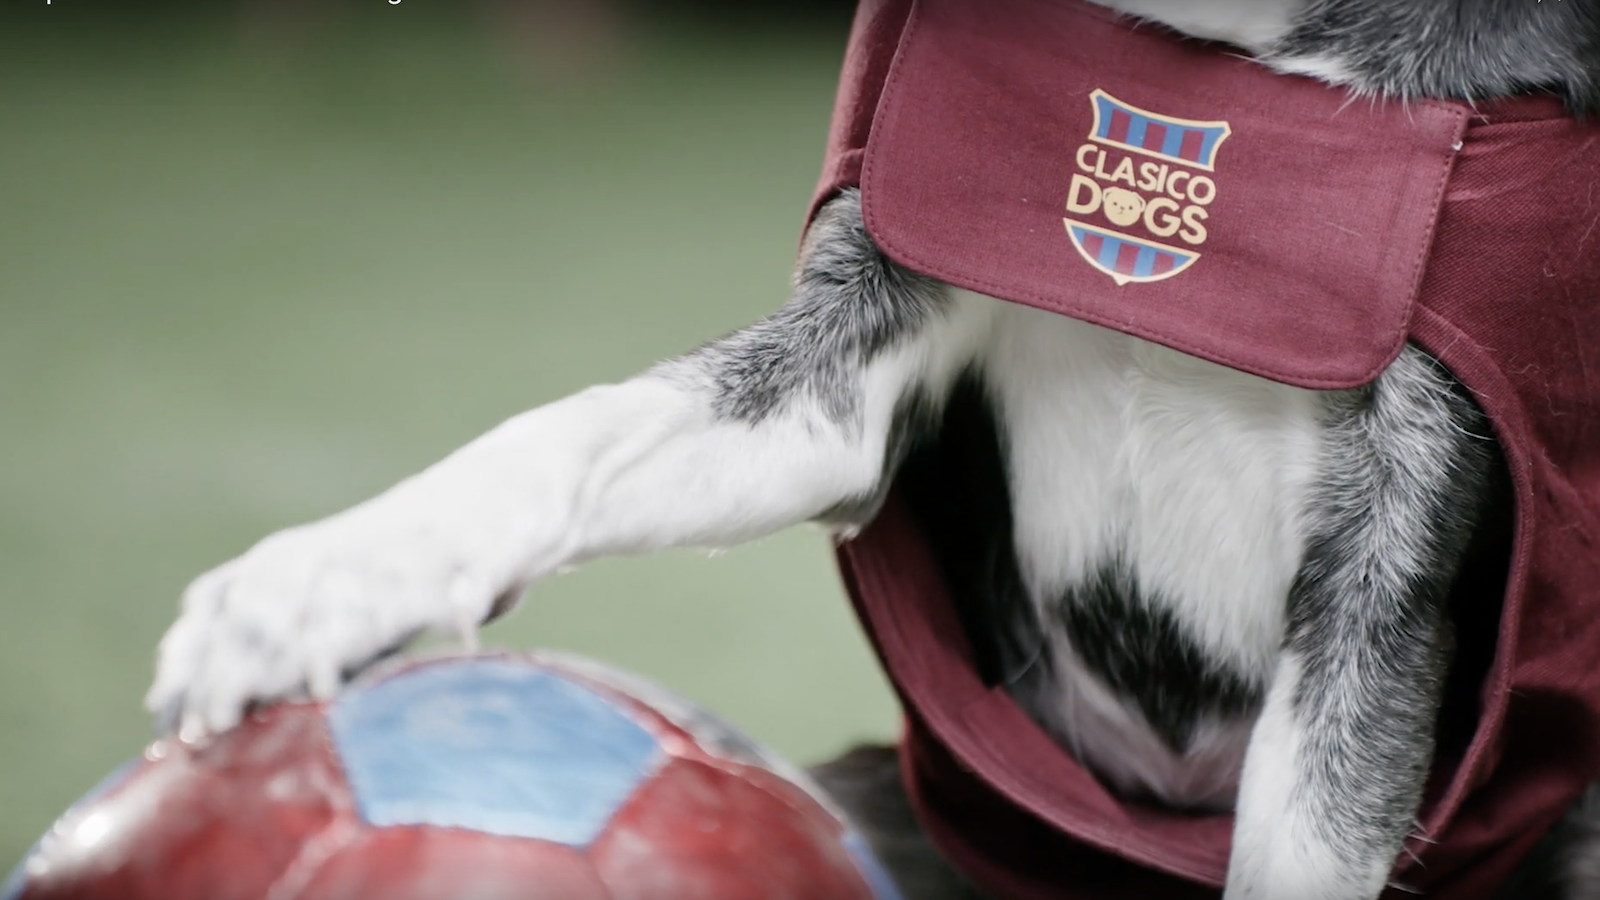 Hard tackles, Fierce Rivalry, and Four Legs of Skill. Meet the Clasíco Dogs!